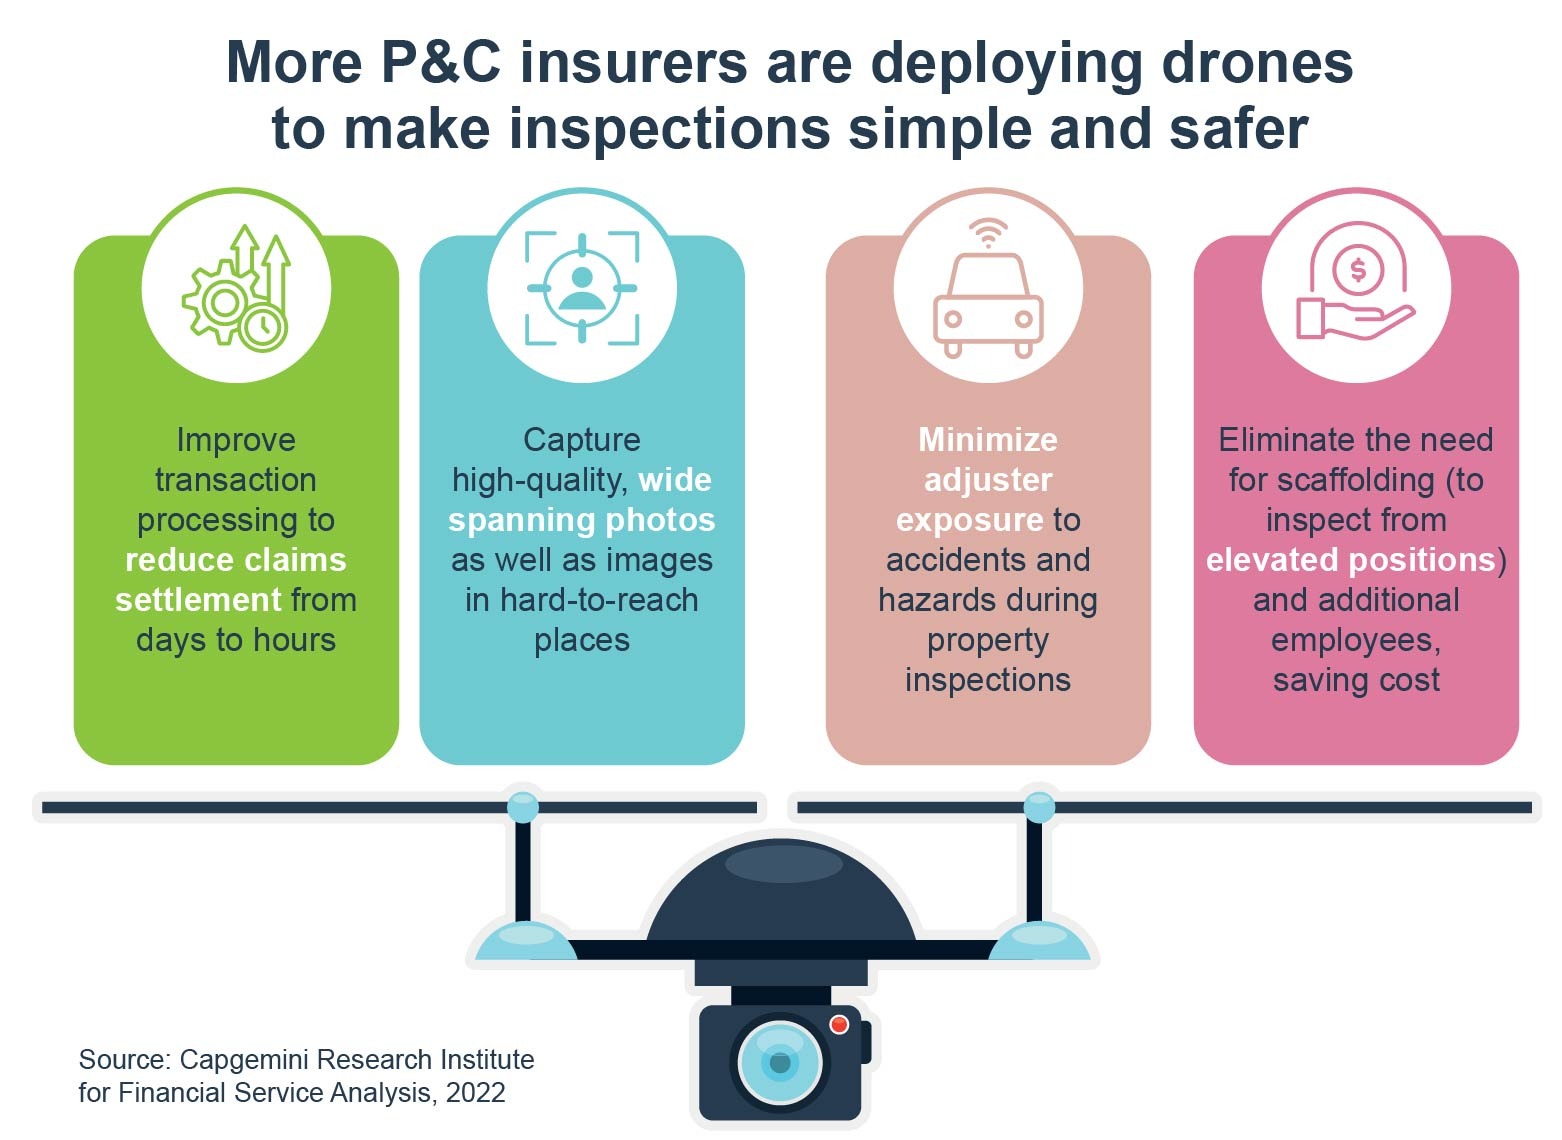 Why P&C Insurers in the US are deploying drones for property inspections